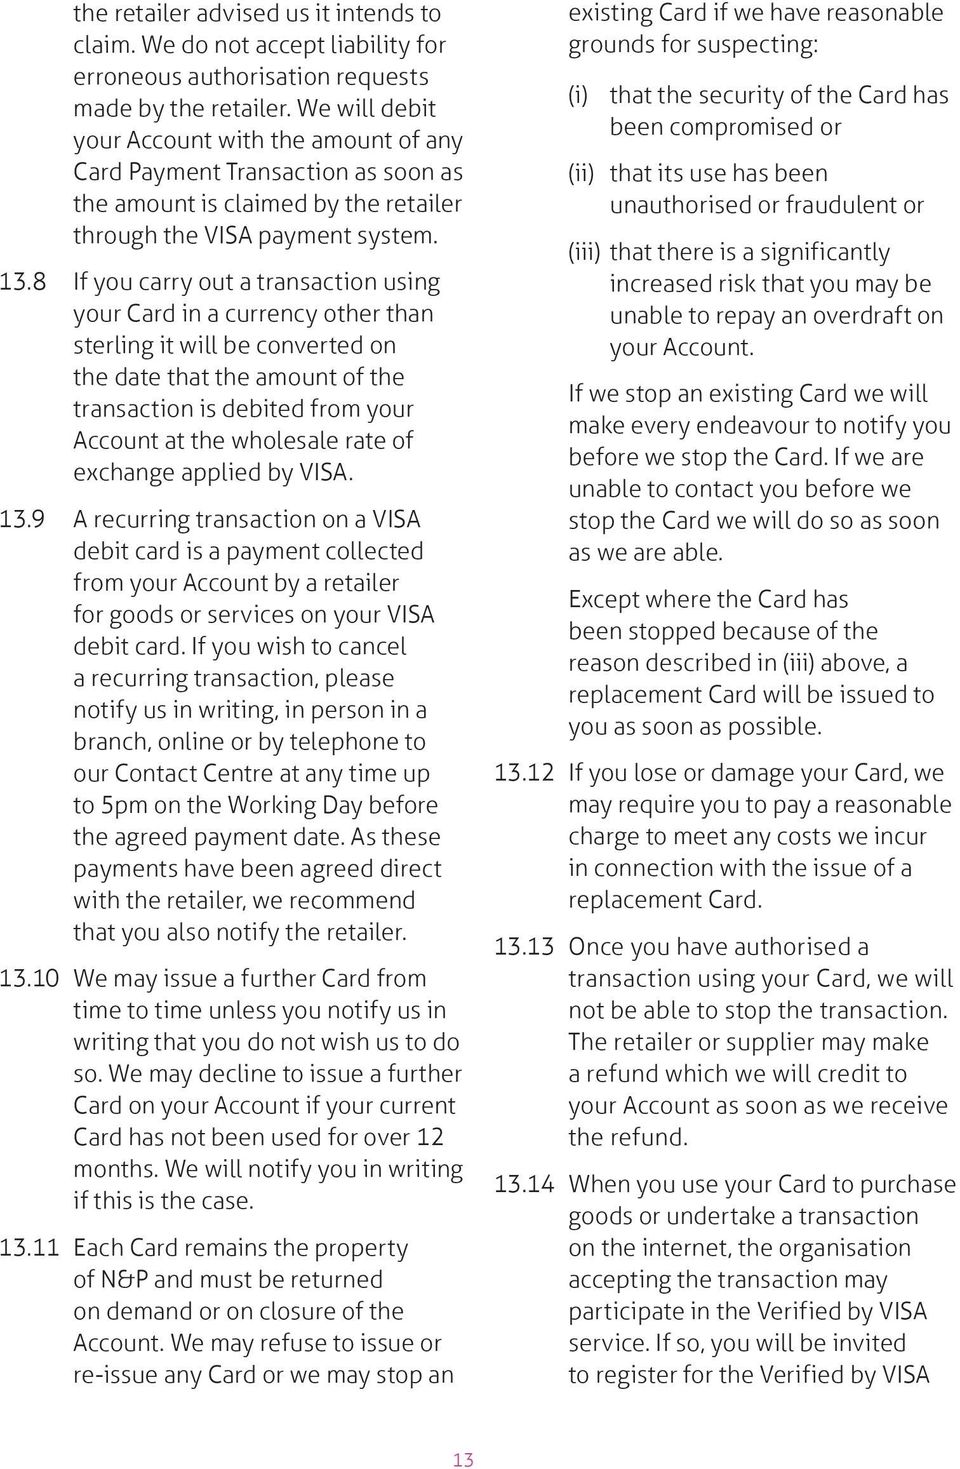 8 If you carry out a transaction using your Card in a currency other than sterling it will be converted on the date that the amount of the transaction is debited from your Account at the wholesale